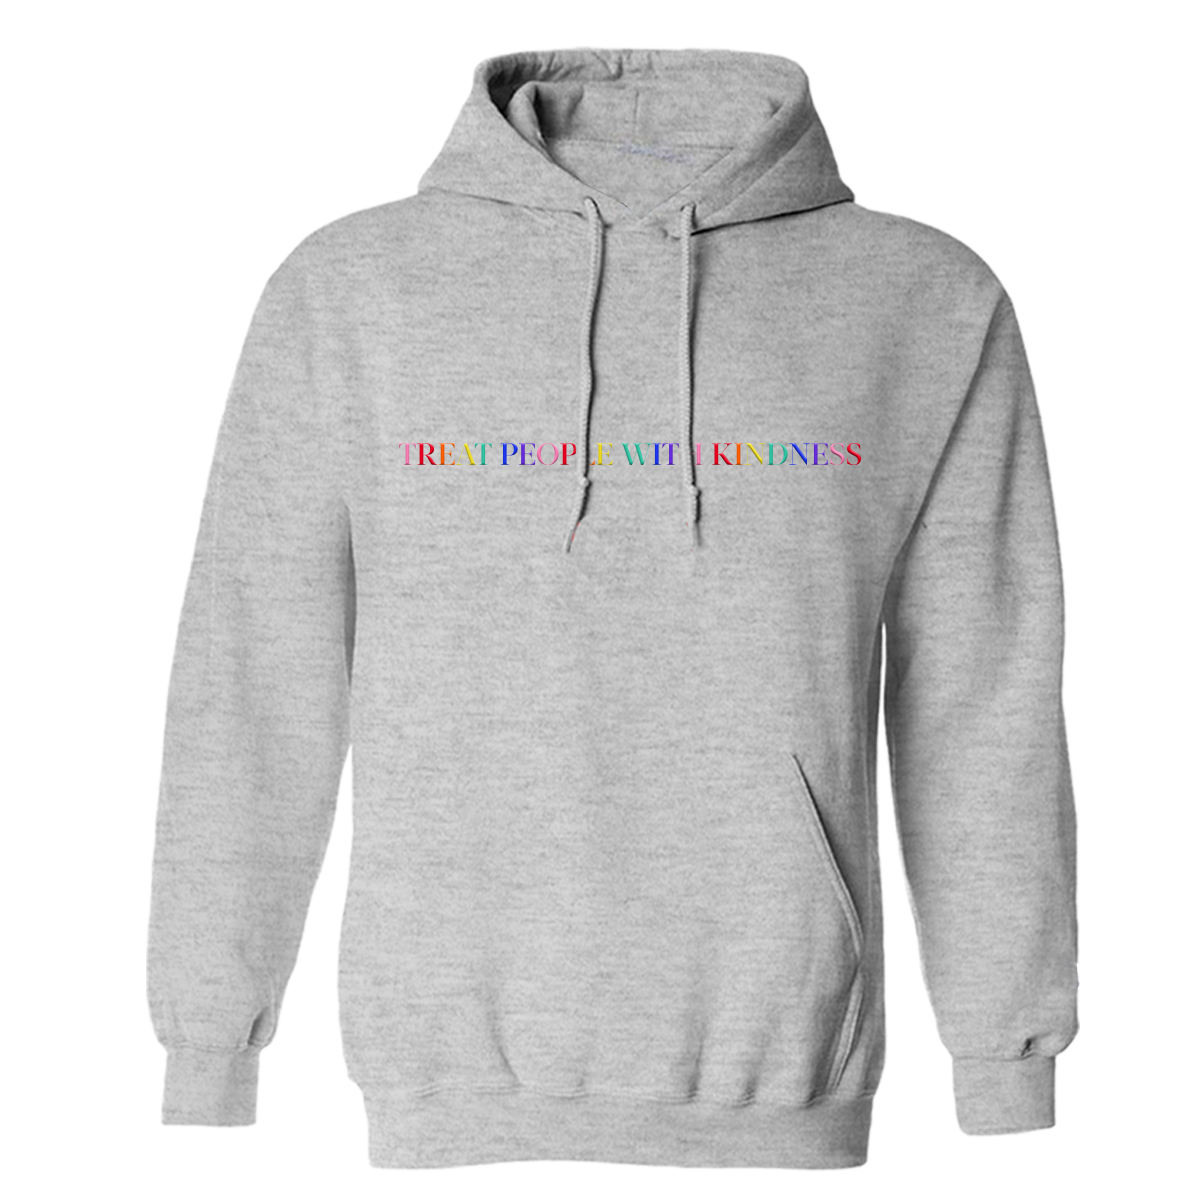 Treat People With Kindness Hoodie - Grey